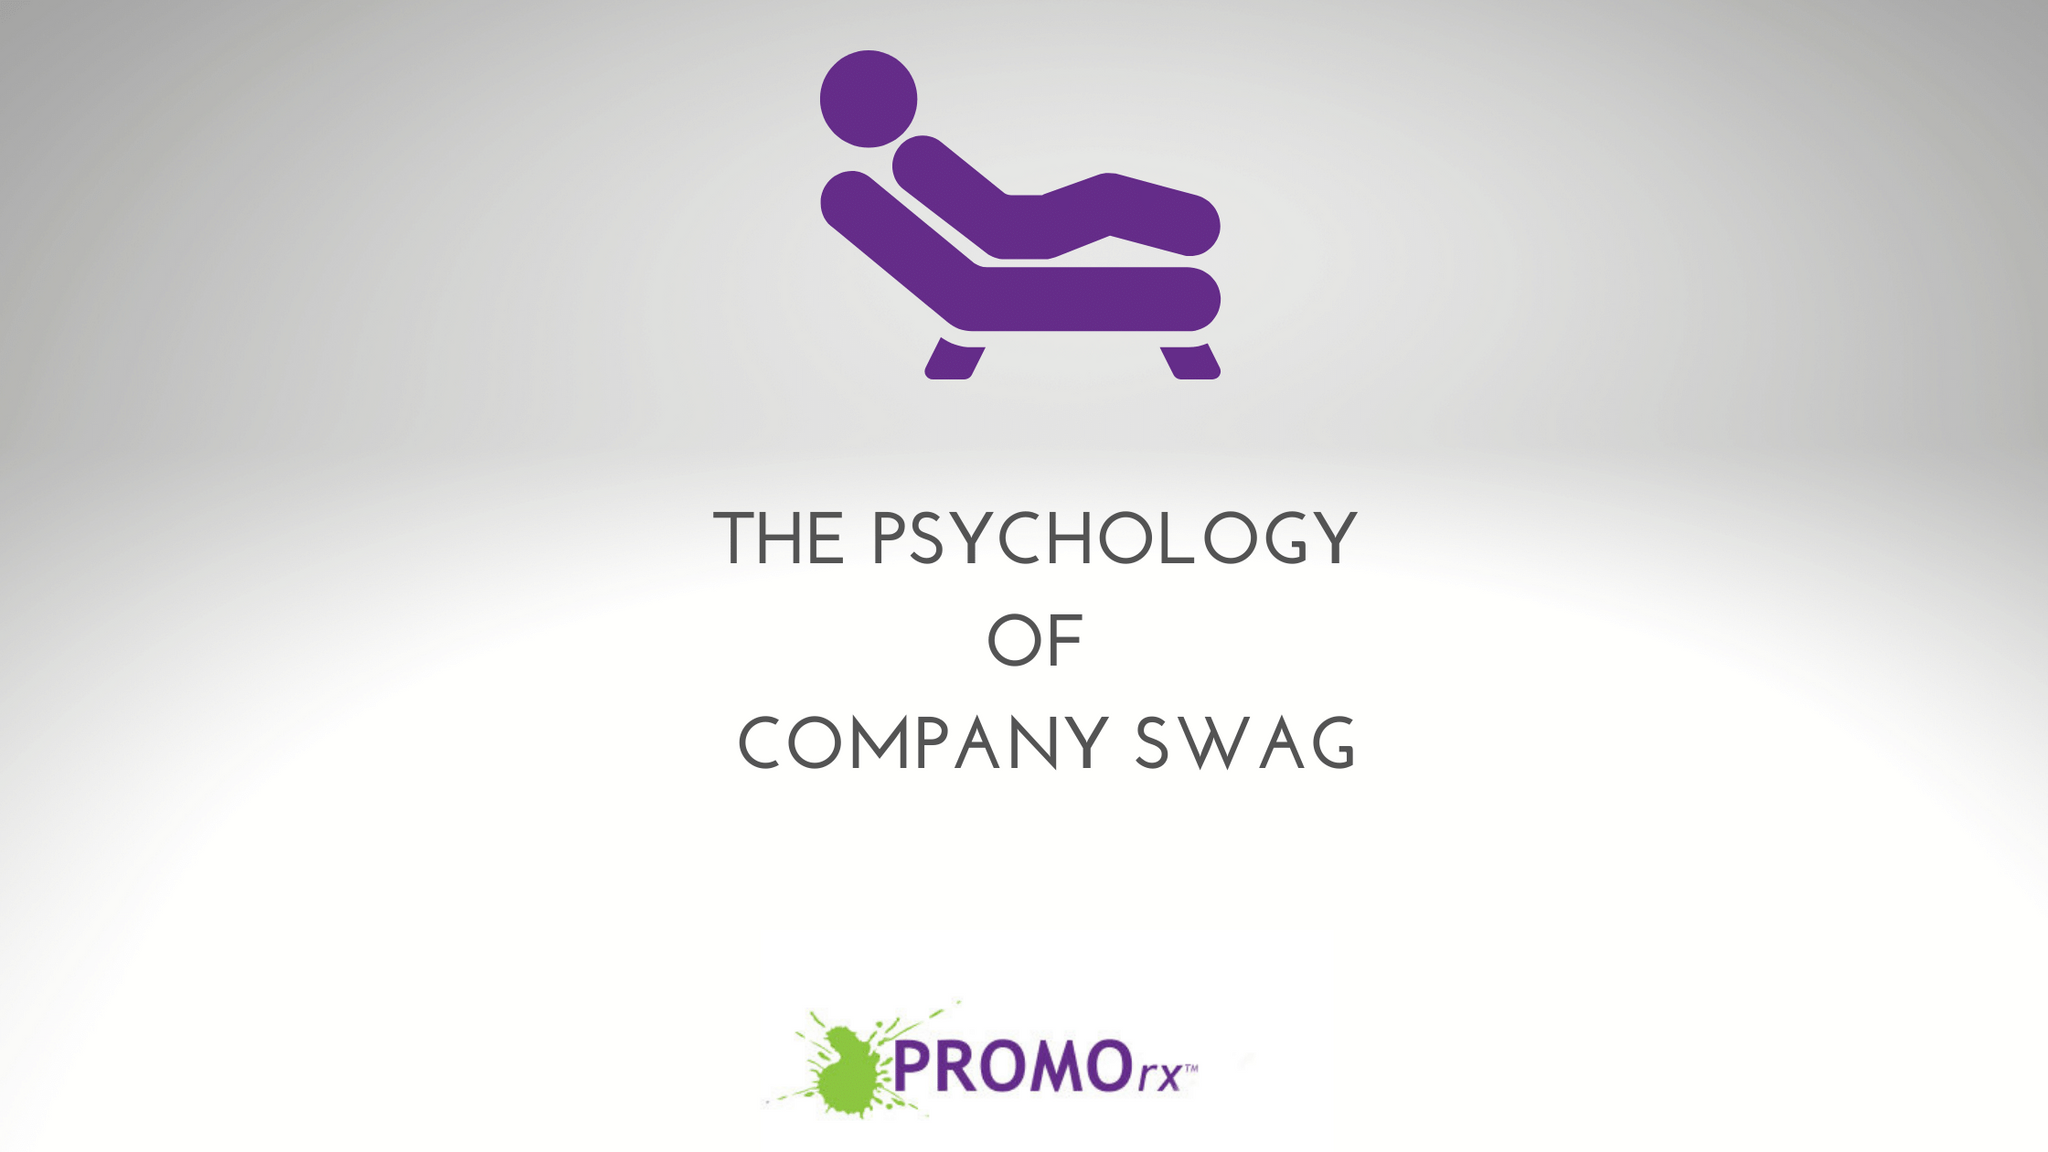 The Psychology of Company Swag